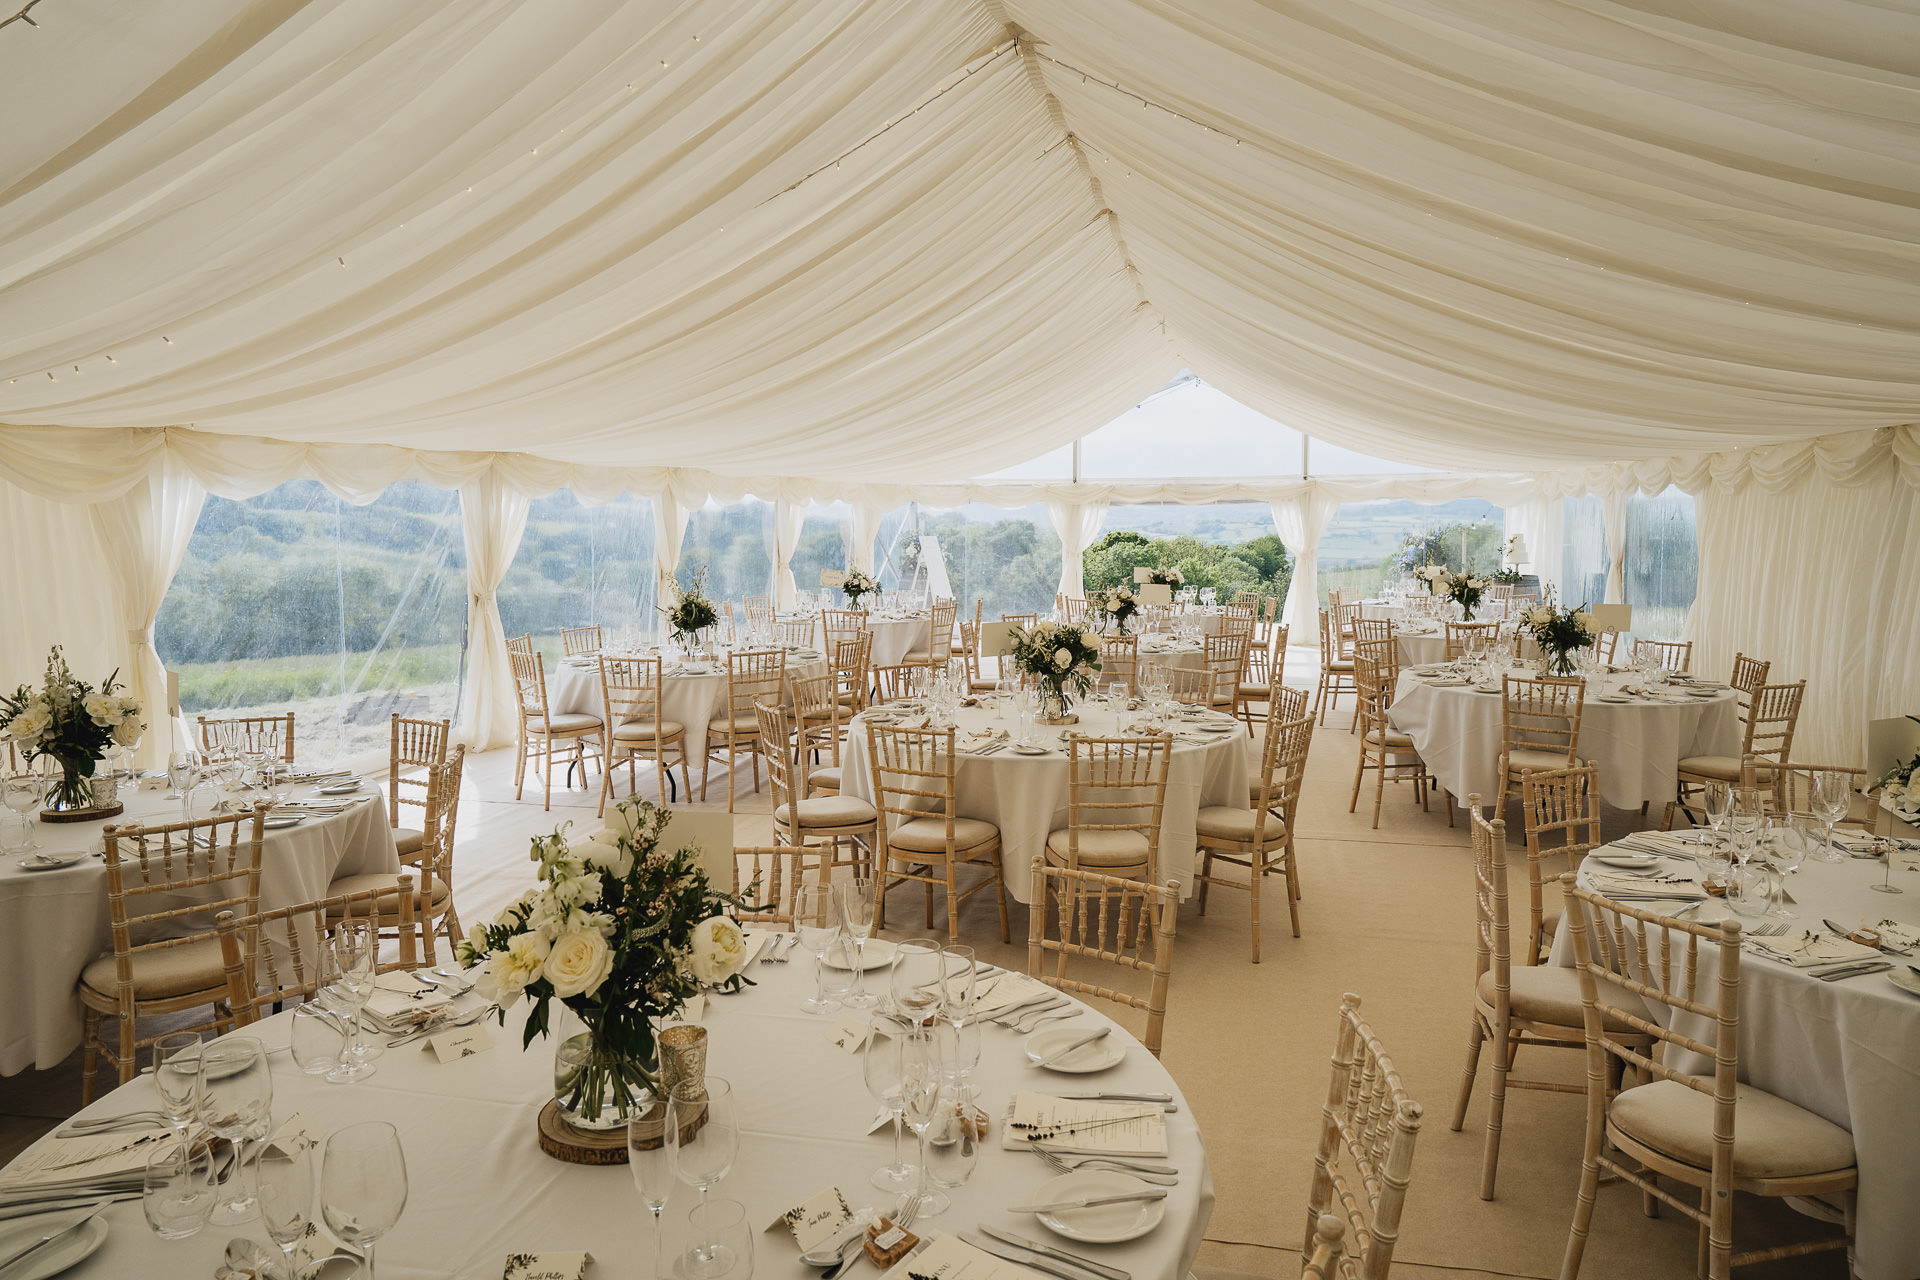 Interior of a wedding marquee at River Cottage